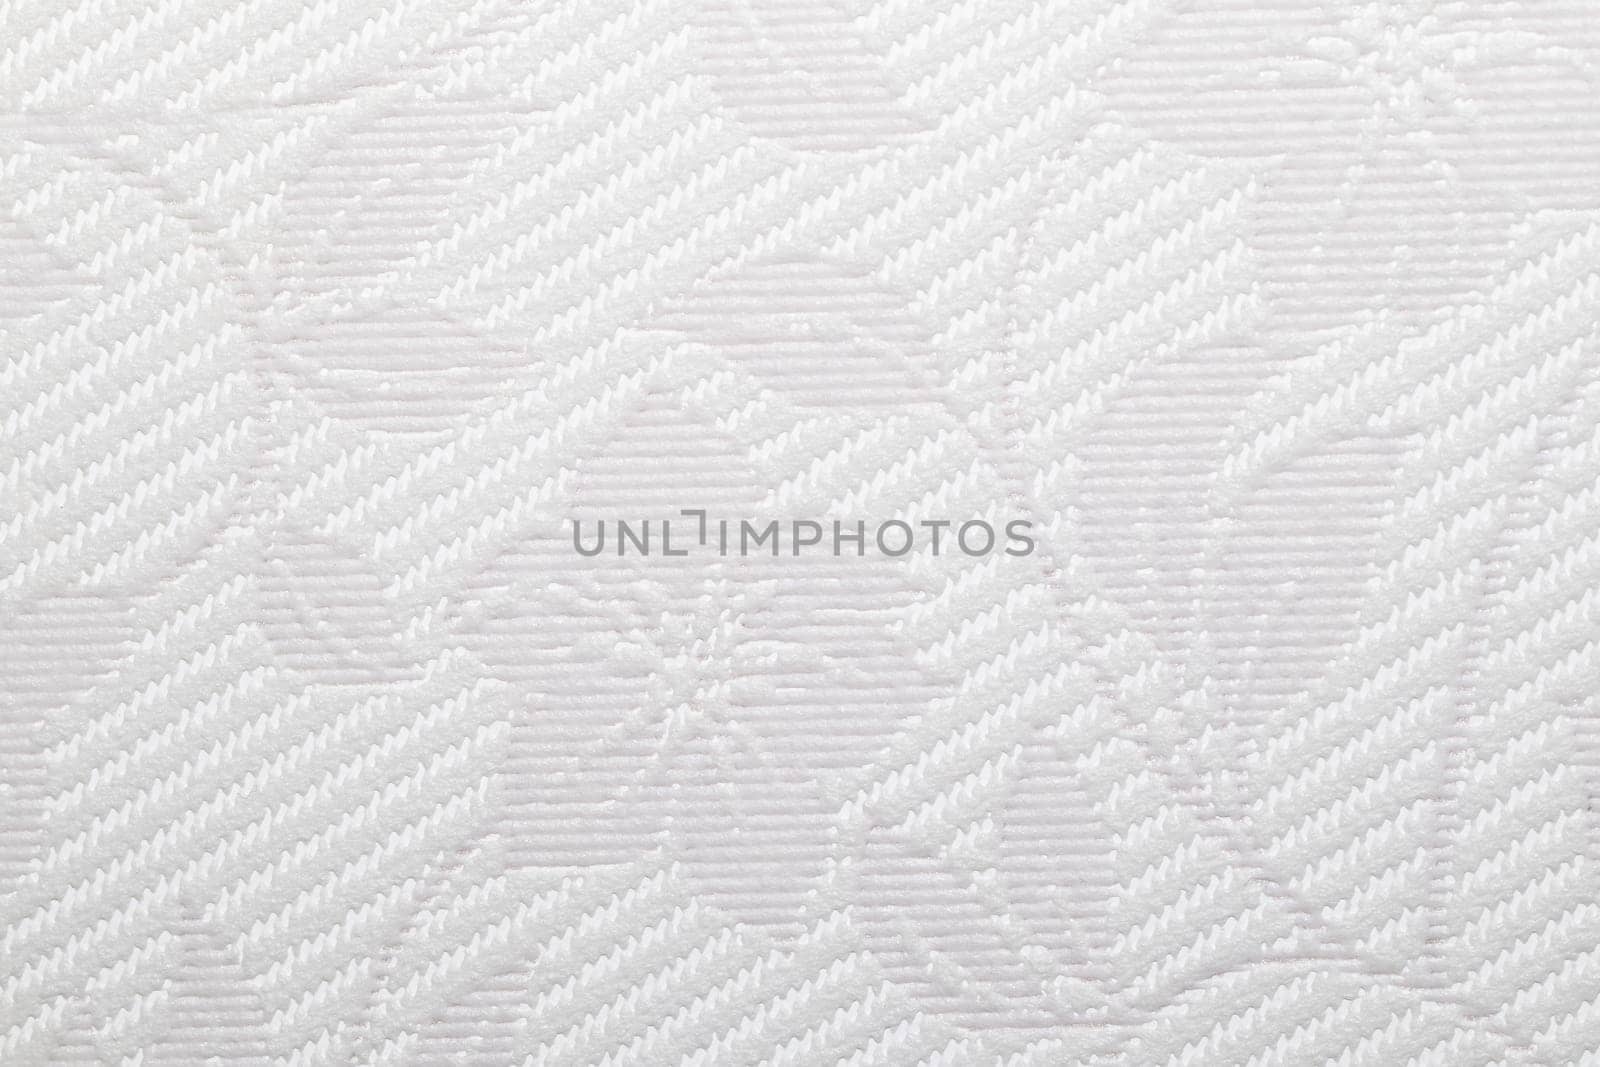 Close-Up View of Light Gray Textured Vinyl Wallpapers With Diagonal Pattern Design by clusterx